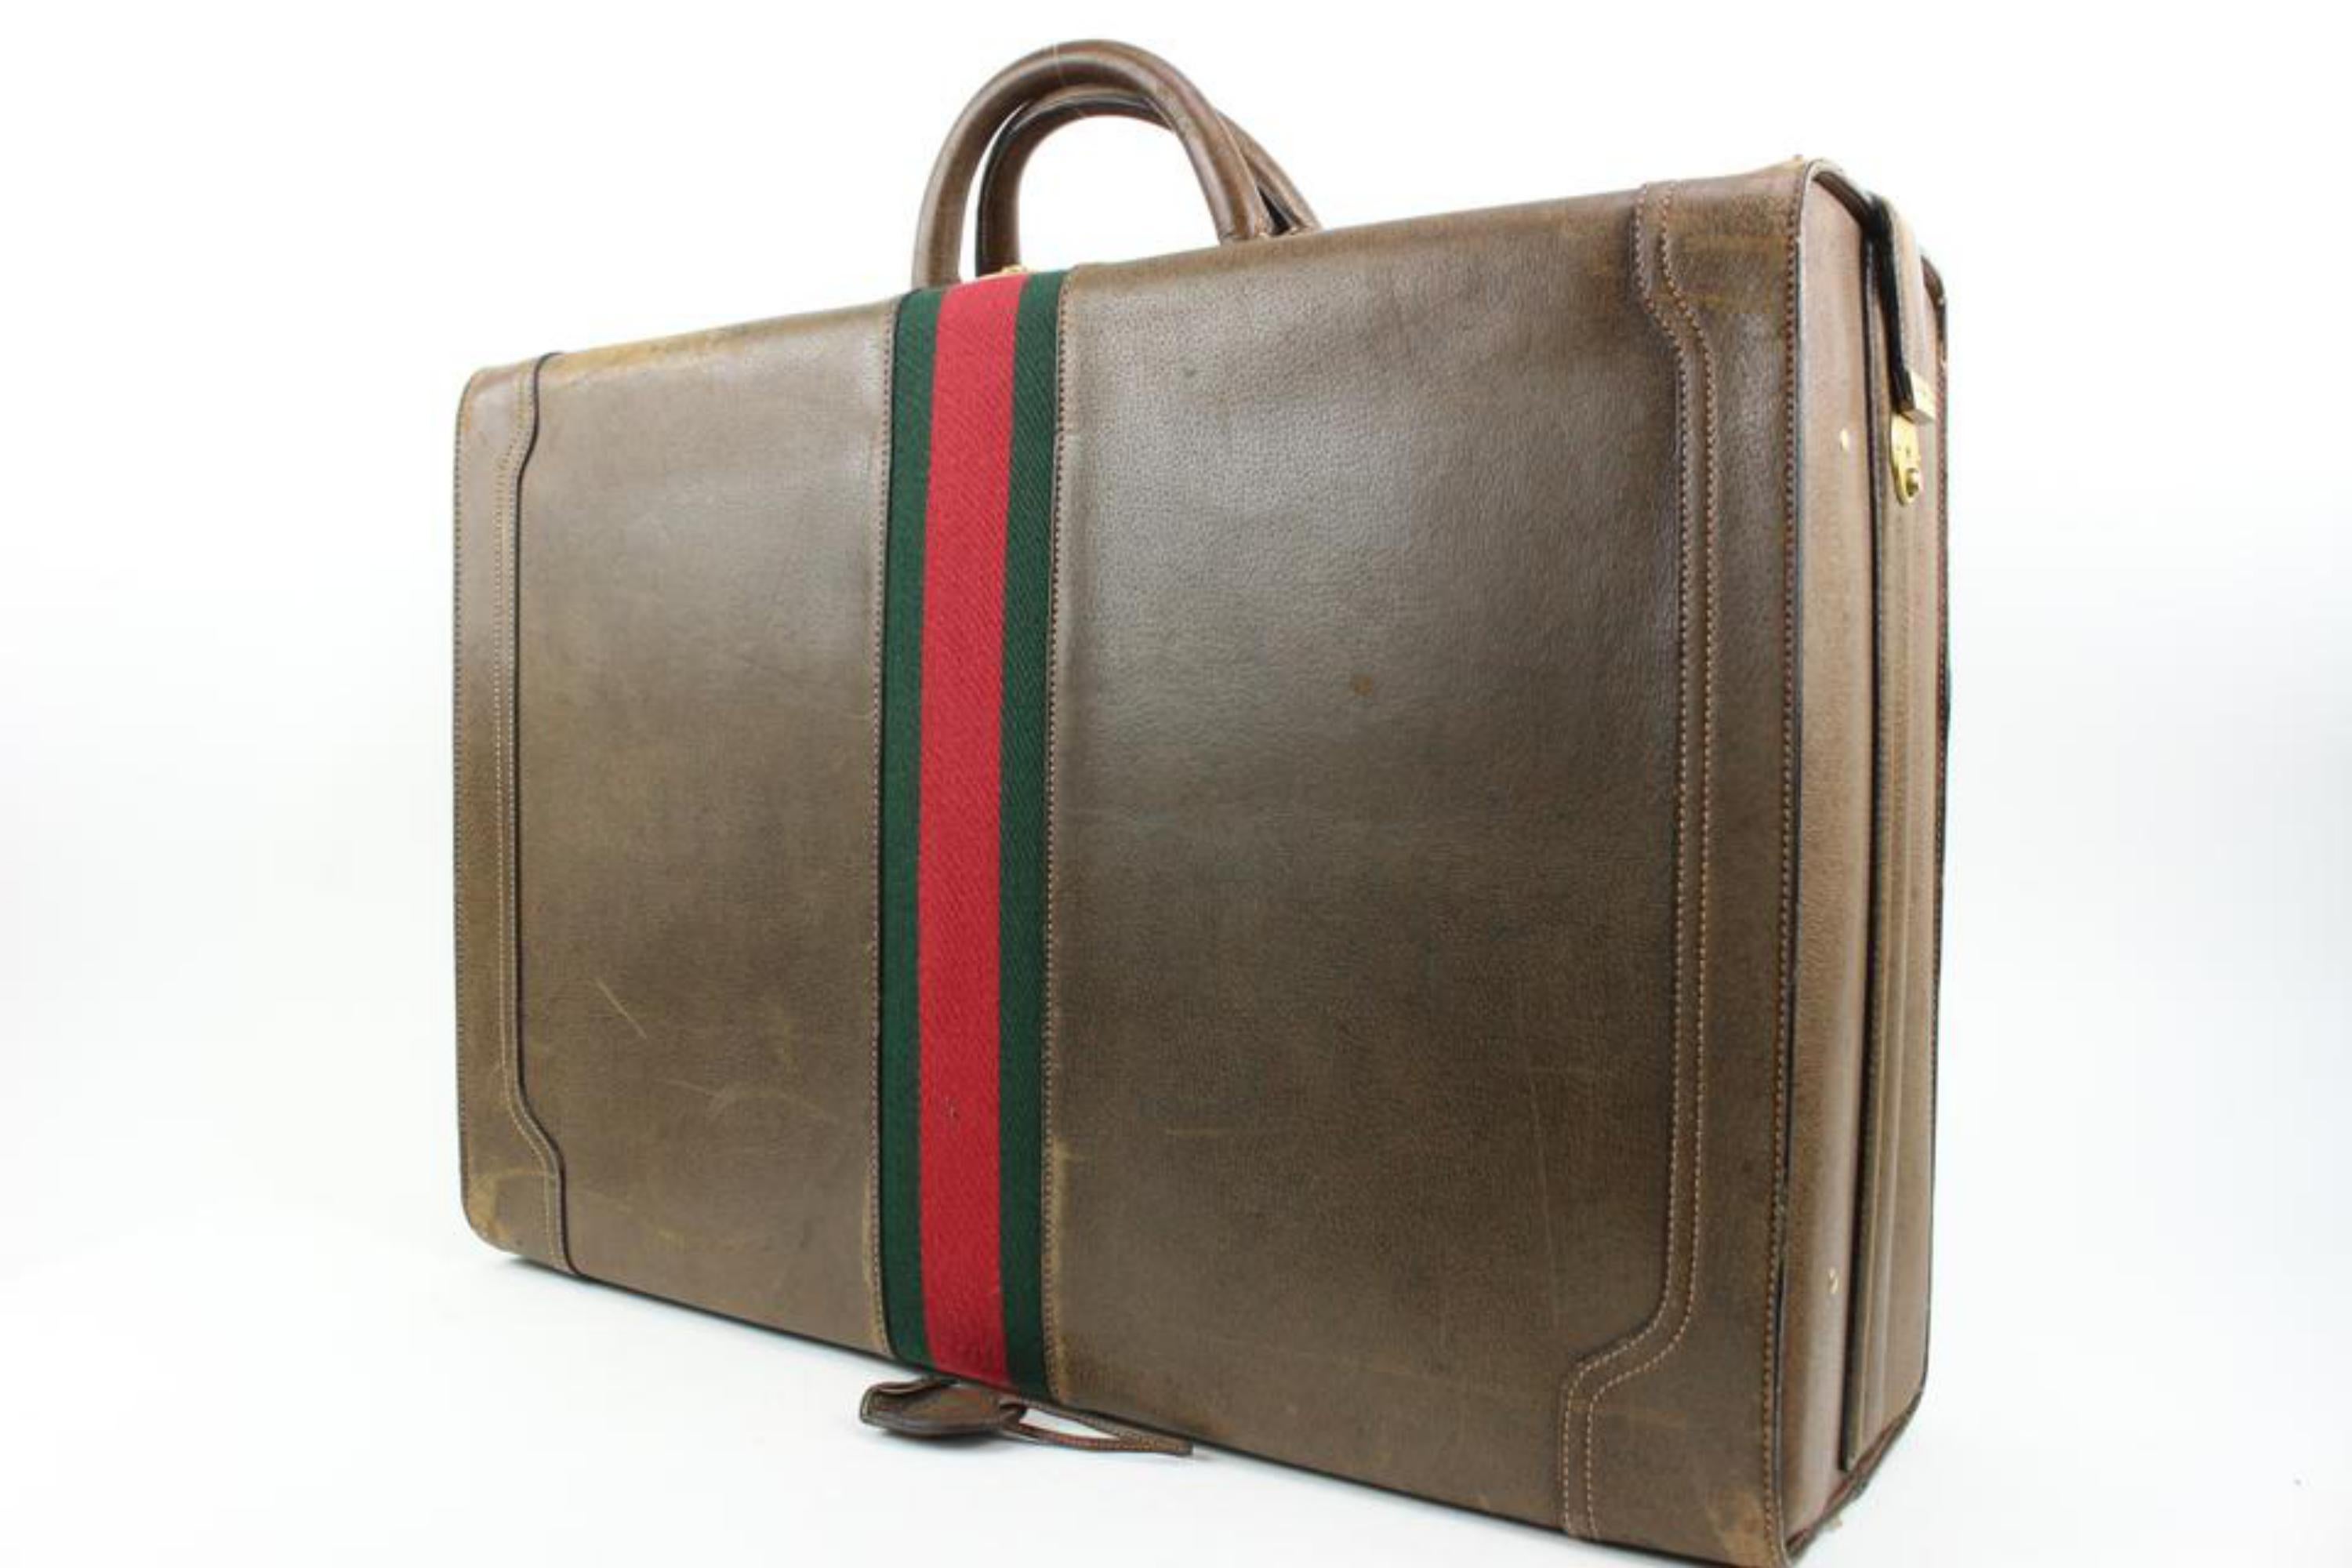 Gucci XL Brown Leather Web Suitcase Hard Trunk s214g91
Made In: Italy
Measurements: Length:  25